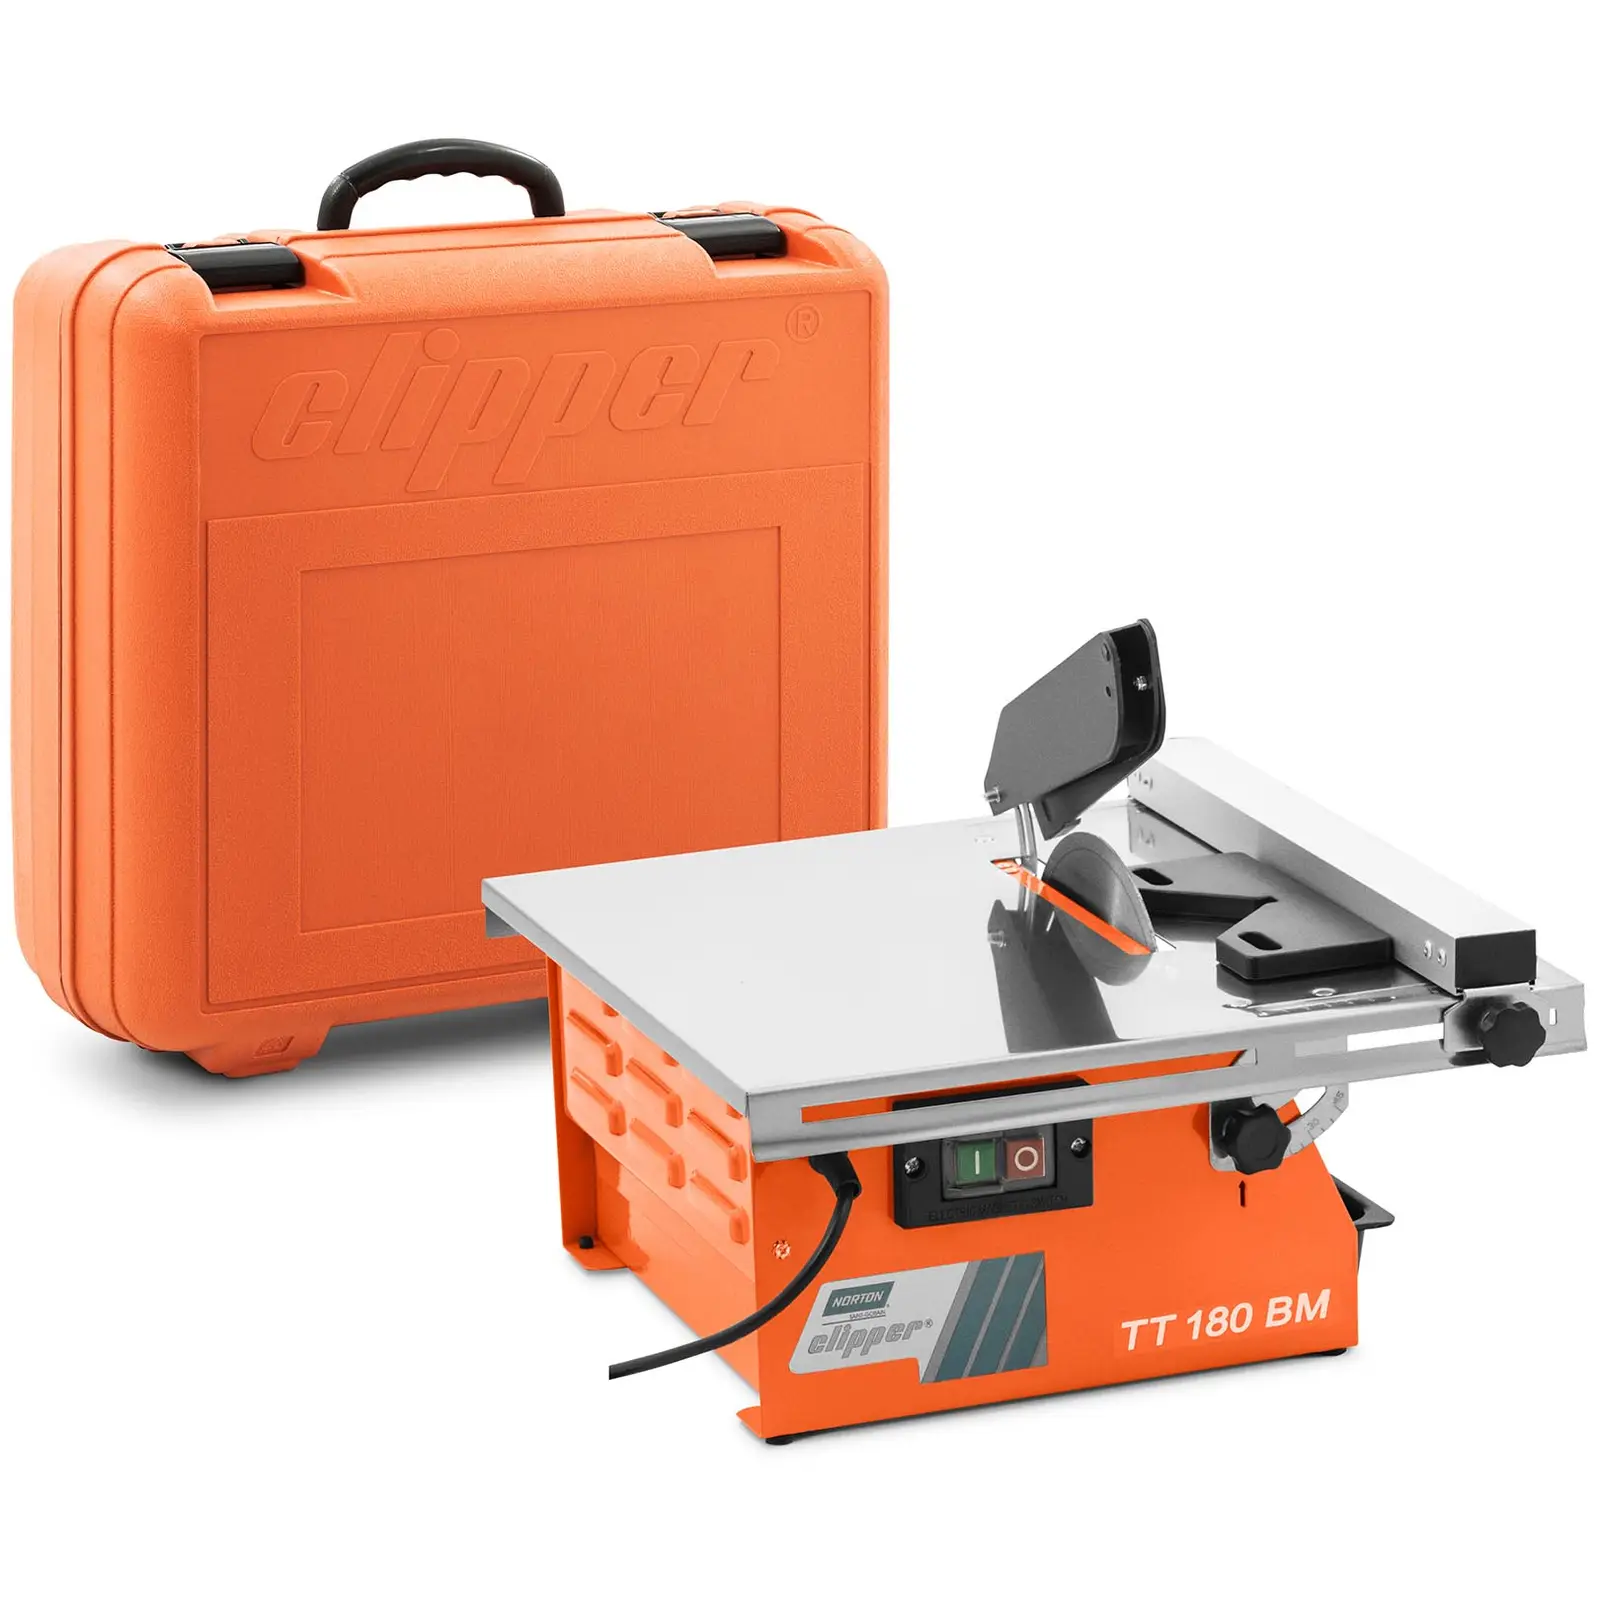 Tile Cutter - 550 W - tiltable stainless steel table from 0 - 45° - water cooling